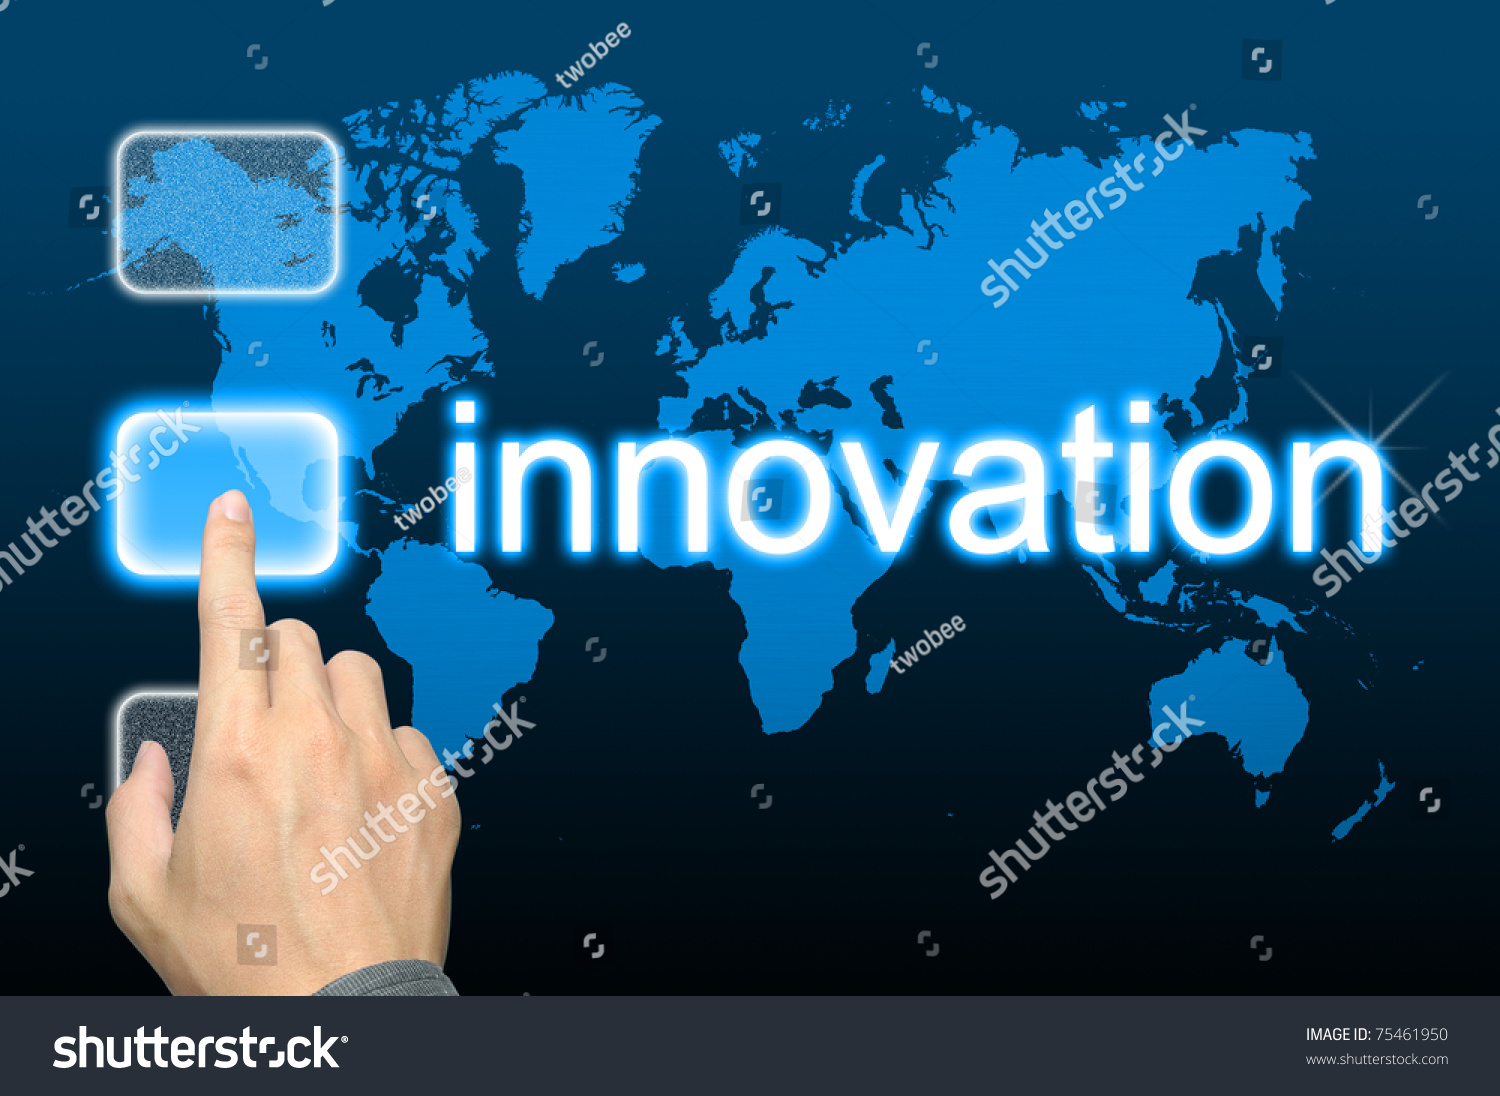 businessman hand pressing innovation button on a touch screen interface #75461950